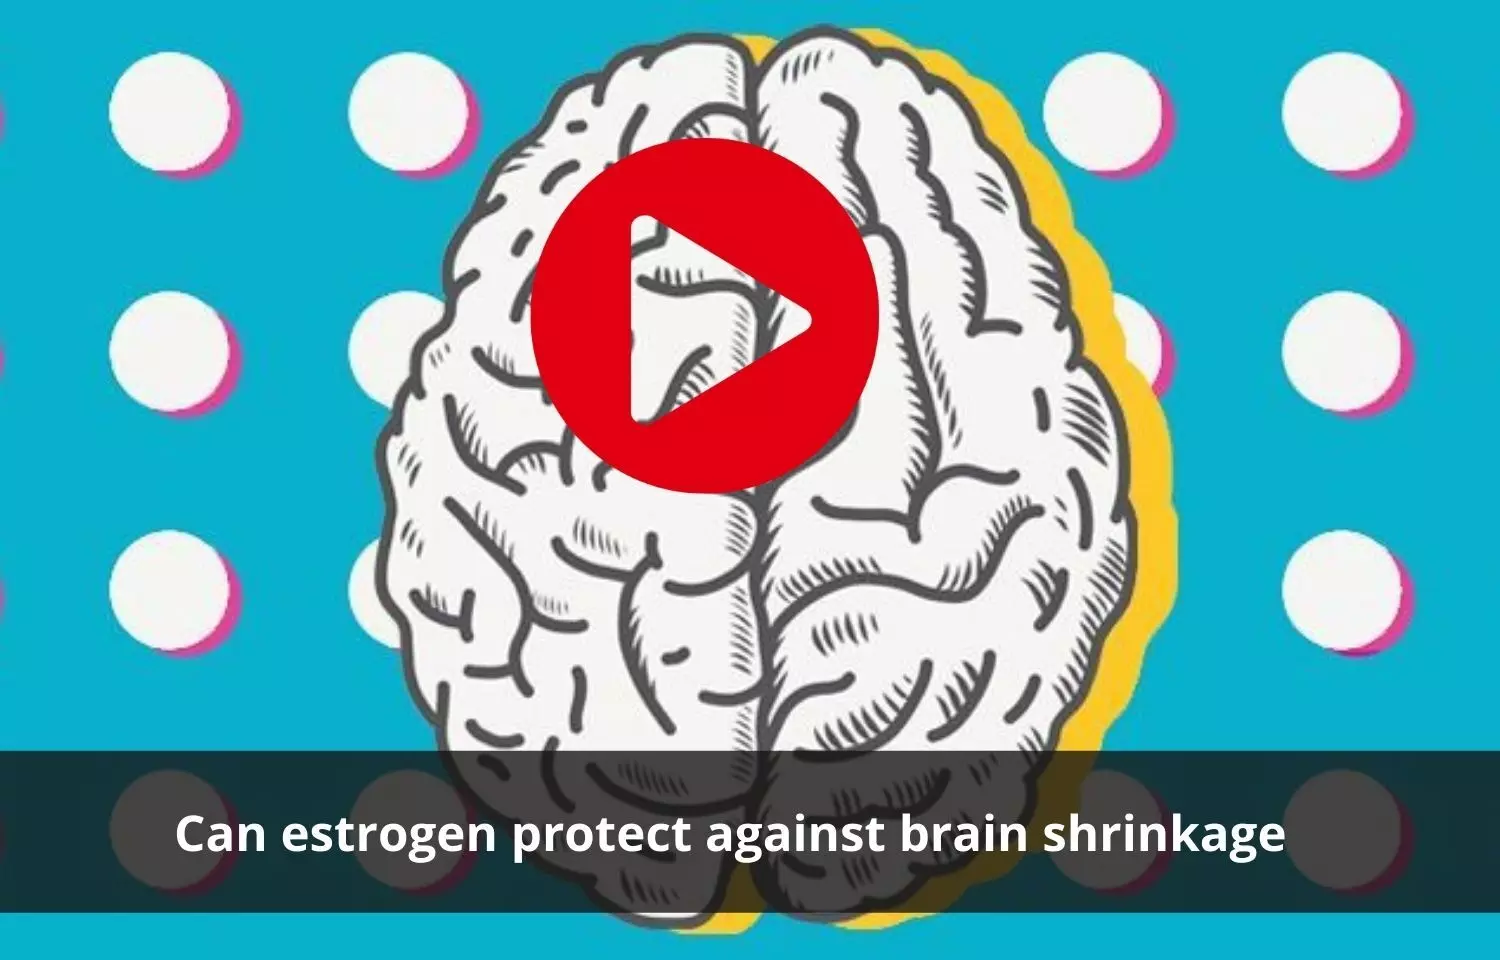 Estrogen  might be protective against brain shrinkage